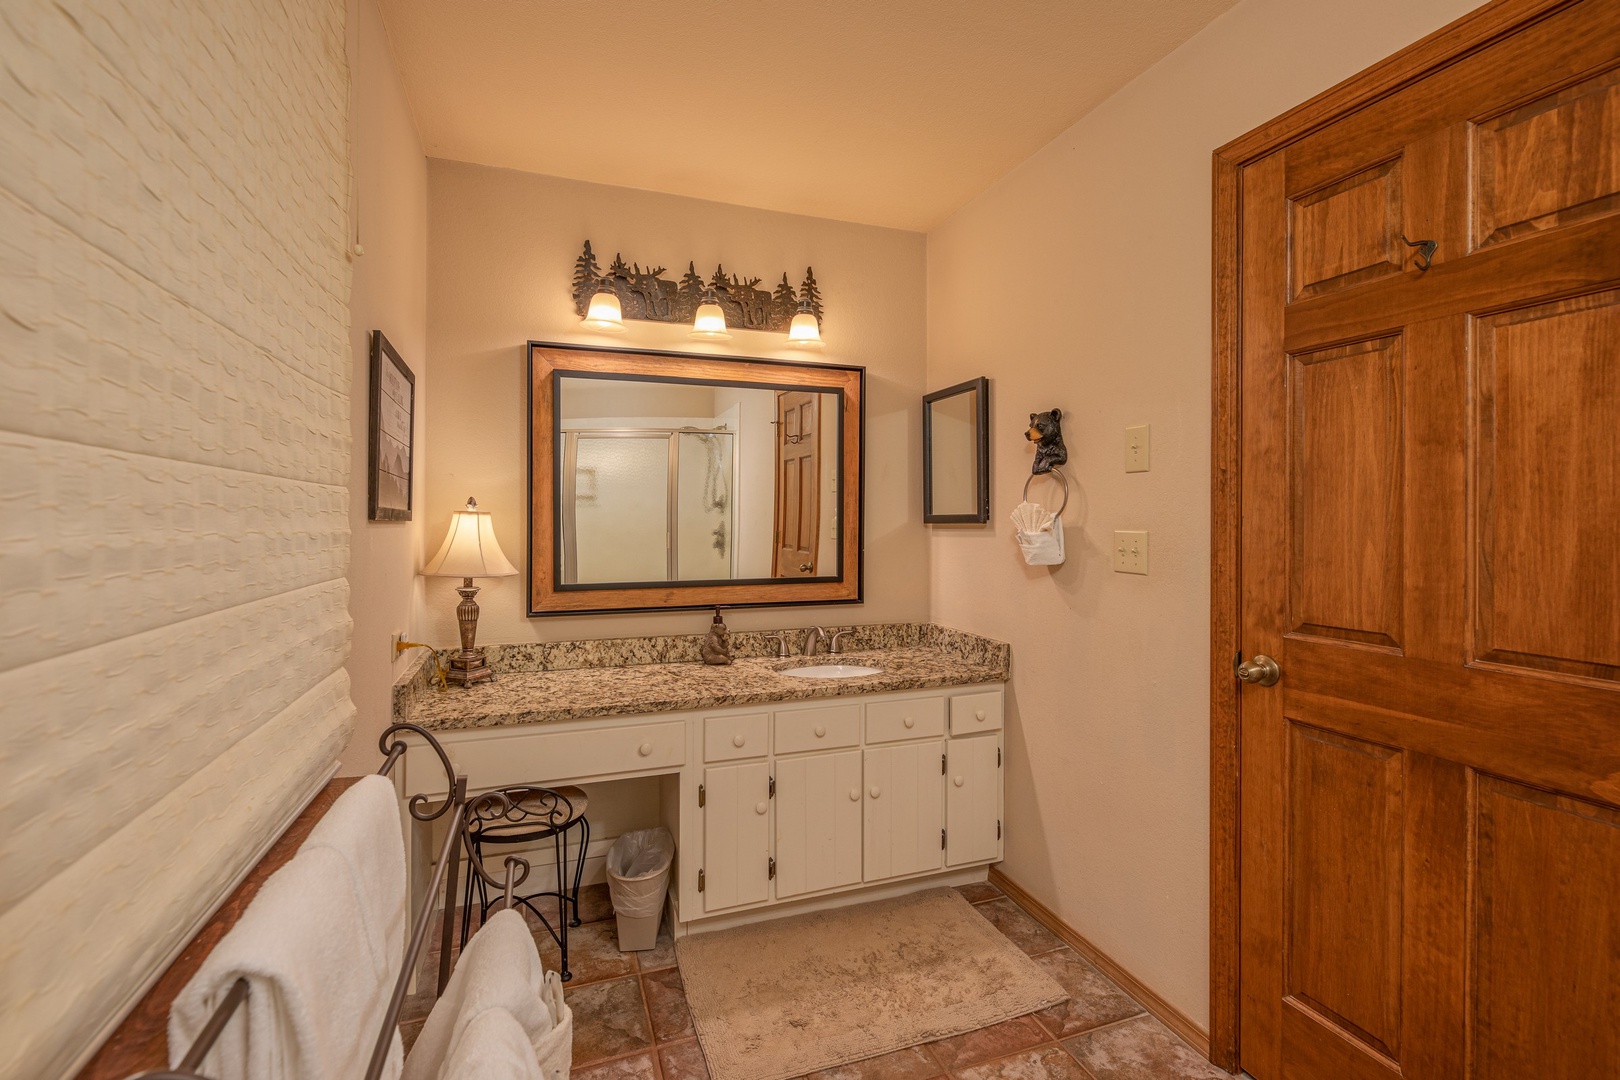 Vanity and dressing area in a bathroom at Lazy Bear Retreat, a 4 bedroom cabin rental located in Pigeon Forge